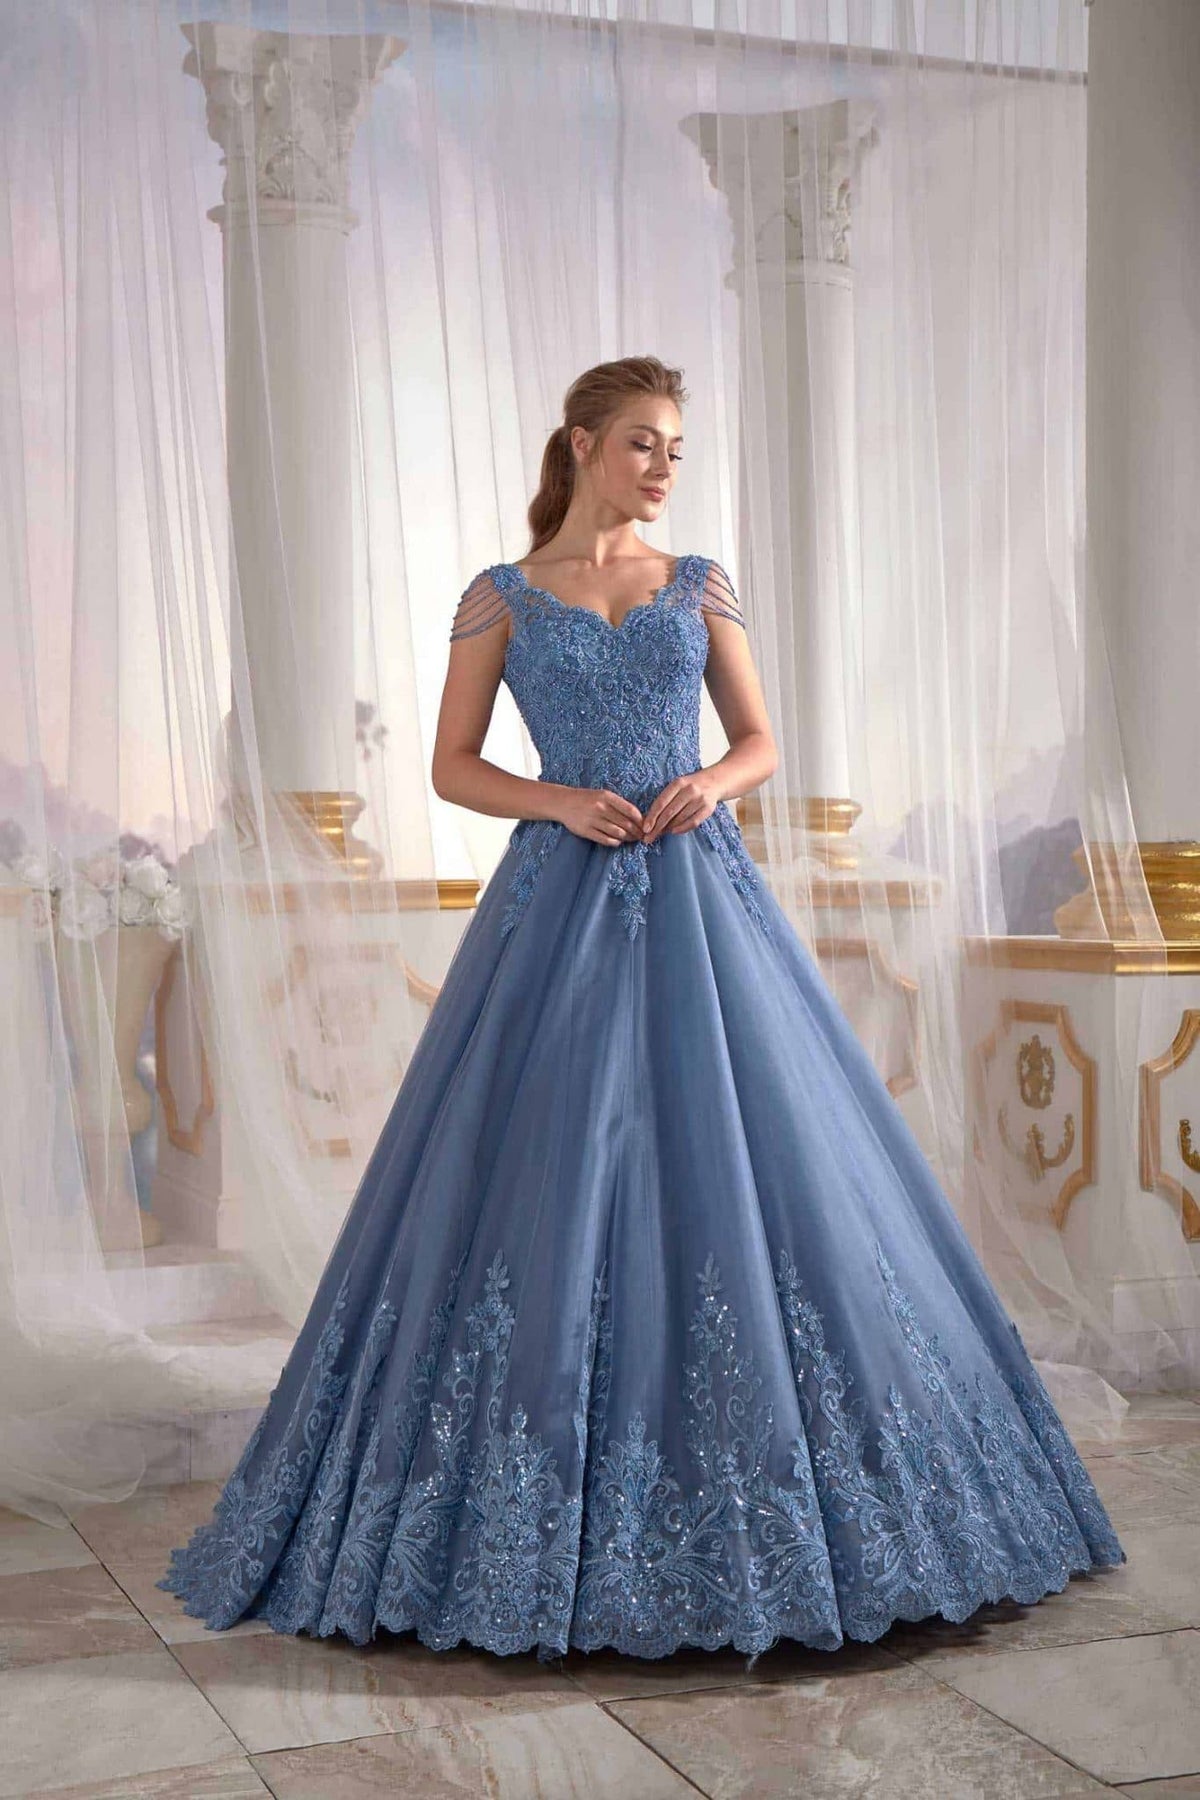 prom dress shopping Anthracite Blue Low Sleeve Halter Long Evening Dress Needle & Thread embroidered (1)